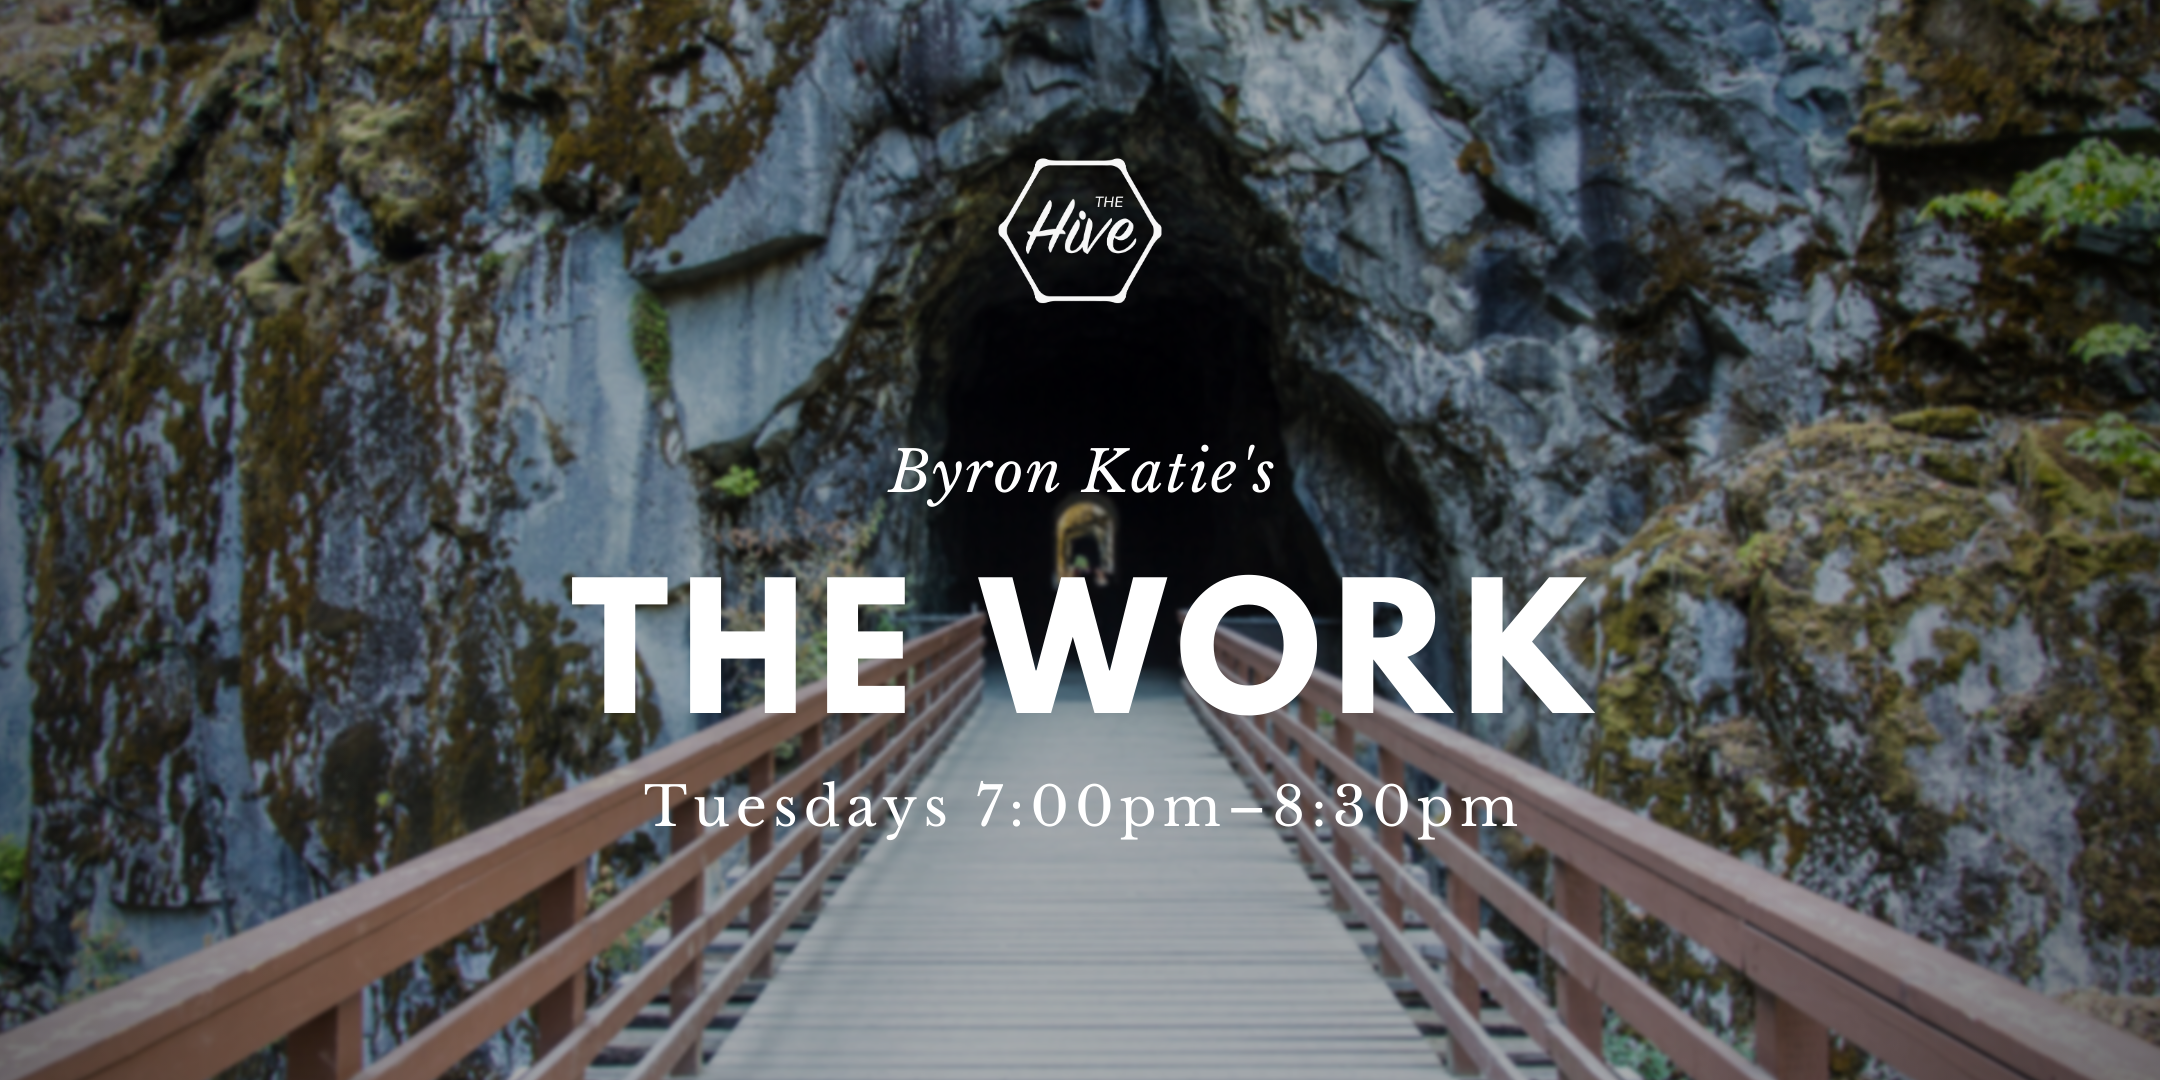 Byron Katie's The Work